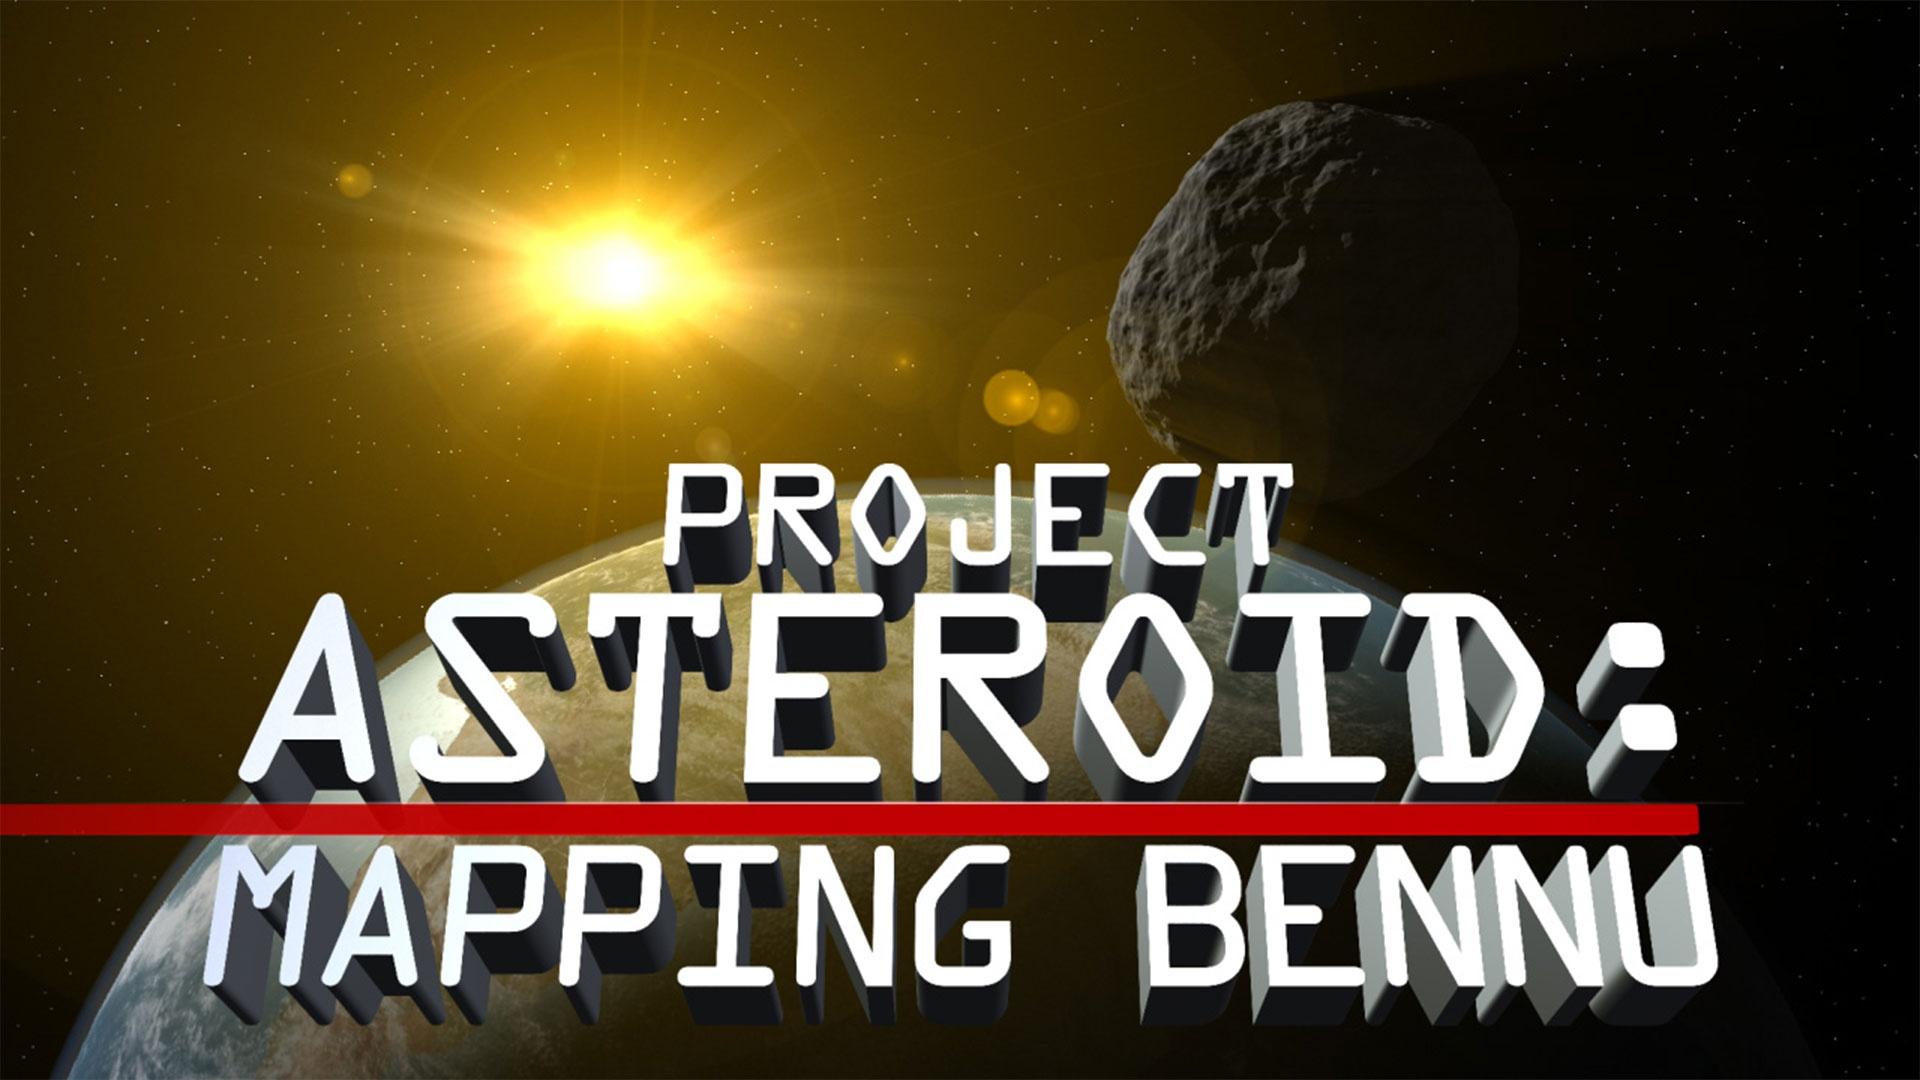 Project Asteroid: Mapping Bennu